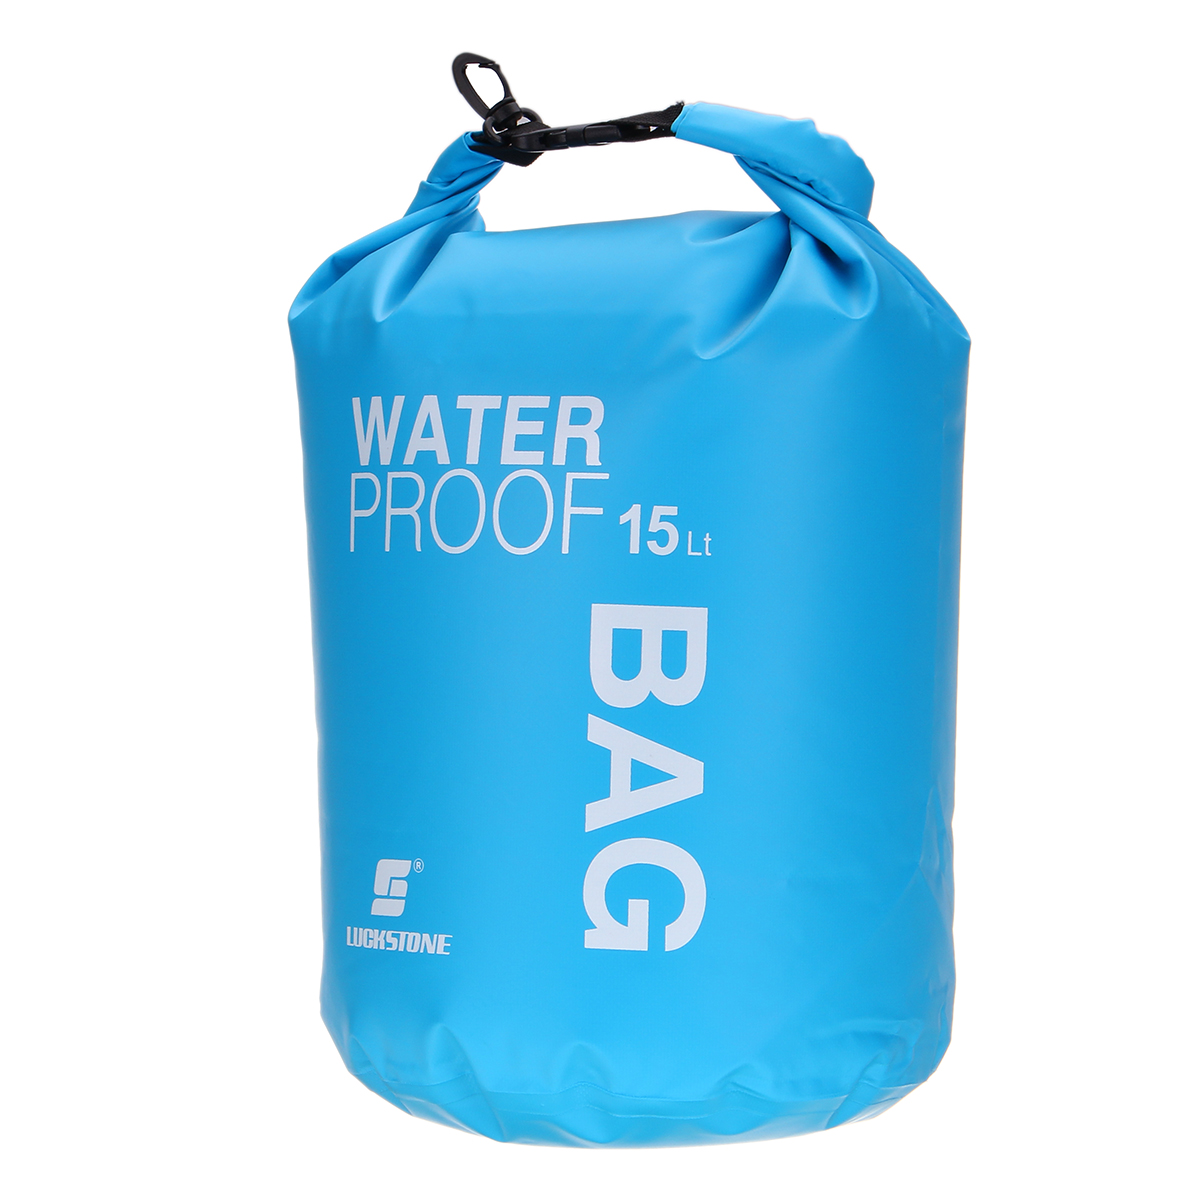 15L-Outdoor-Swimming-Air-Inflation-Floating-Mobile-Phone-Camera-Storage-PVC-Waterproof-Bag-1820816-11